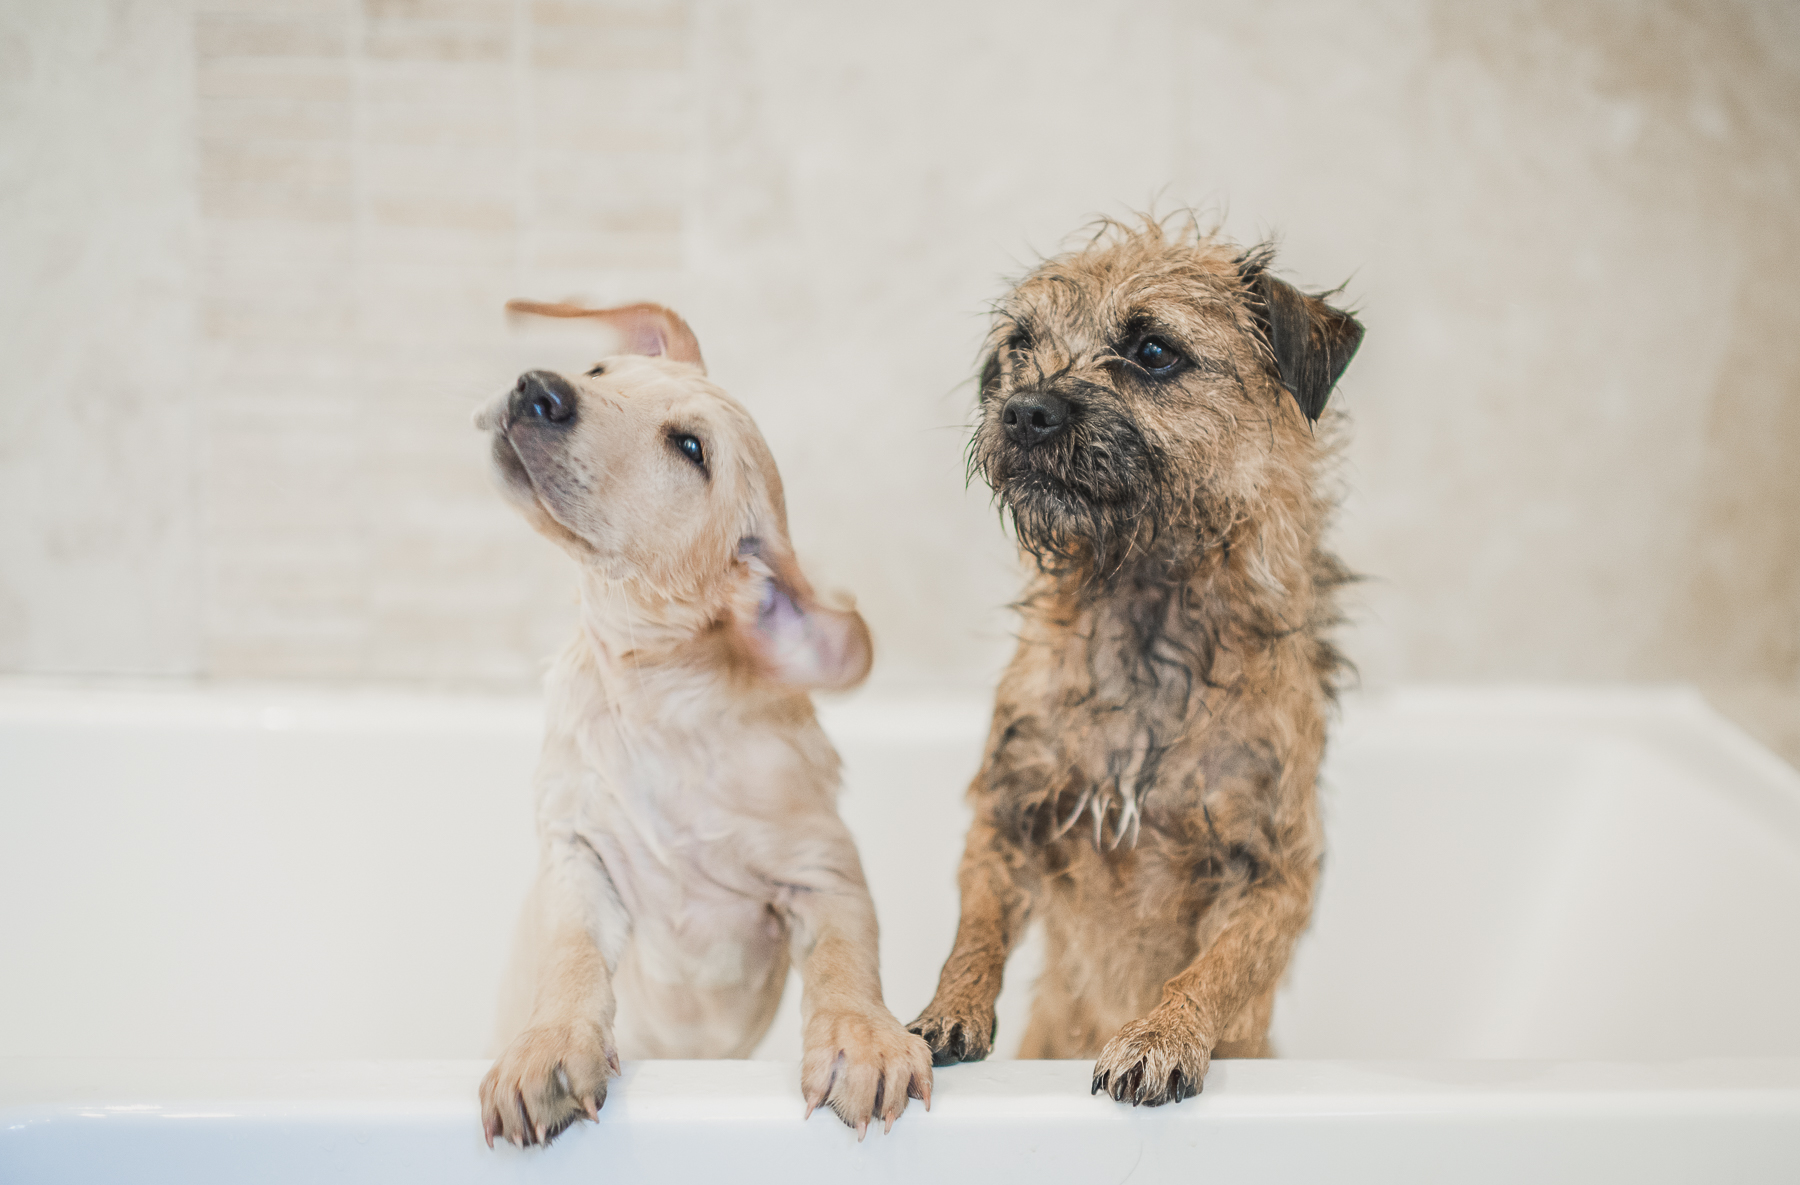 Labrador puppy and a border terrier standing on the edge of the bath